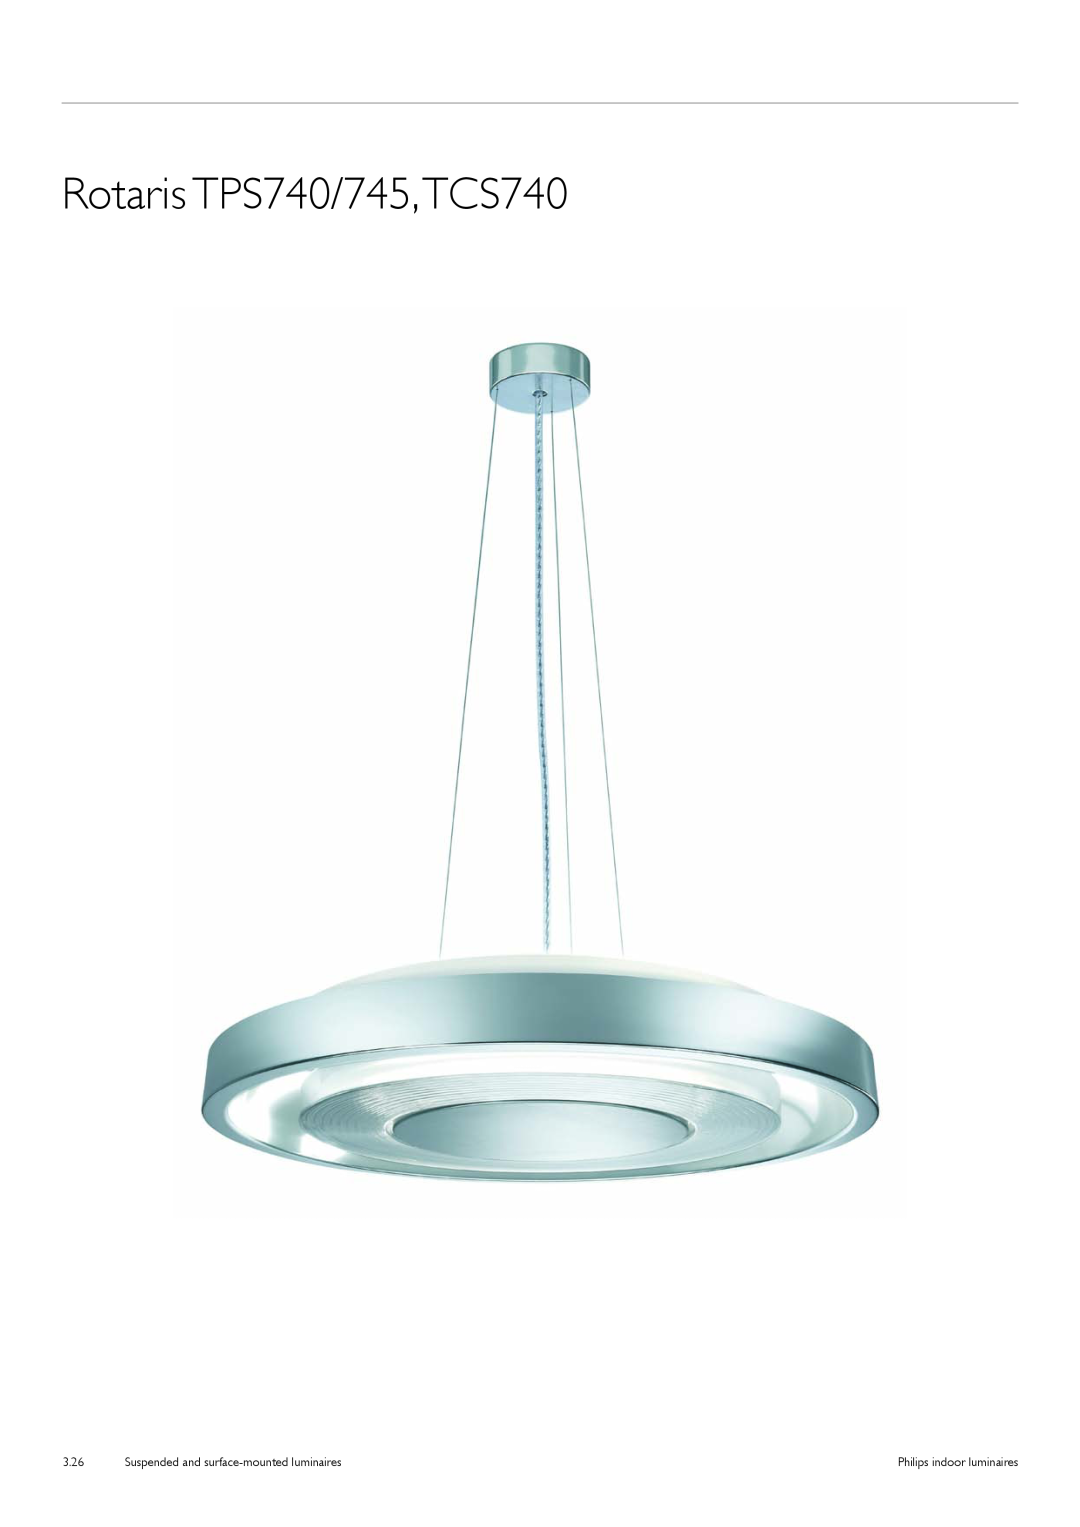 Philips TCS125 manual Rotaris TPS740/745,TCS740, Suspended and surface-mountedluminaires, 3.26, Philips indoor luminaires 